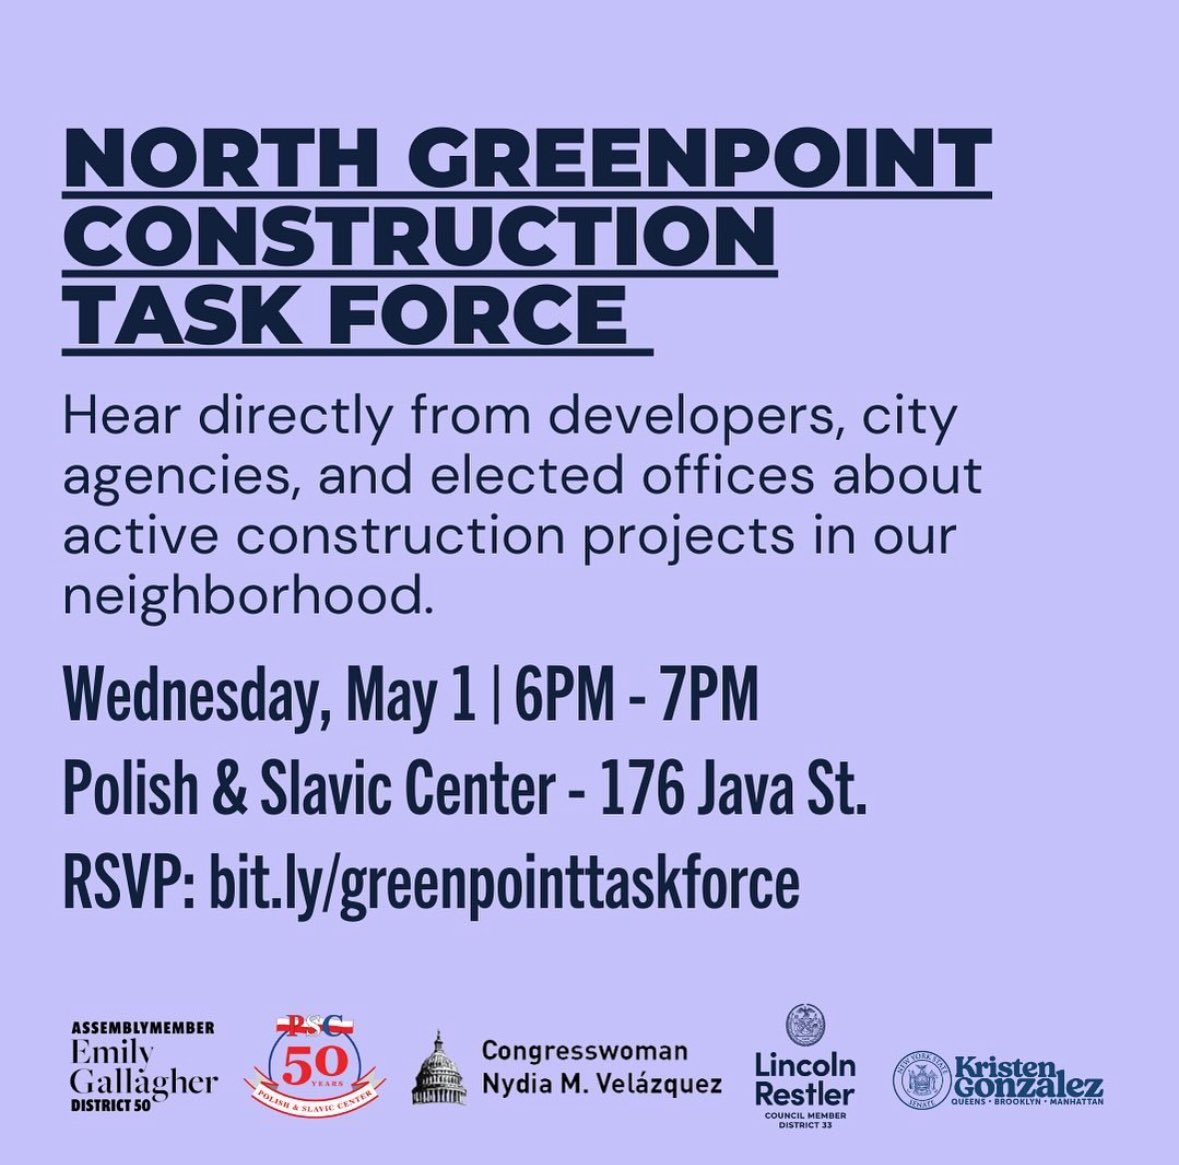 Join us for our next North Greenpoint Construction Task Force Meeting! Come engage directly with developers, City agencies & elected officials about the major construction projects happening across Greenpoint. May 1 at 6PM at the Polish & Slavic Center. docs.google.com/forms/d/e/1FAI…